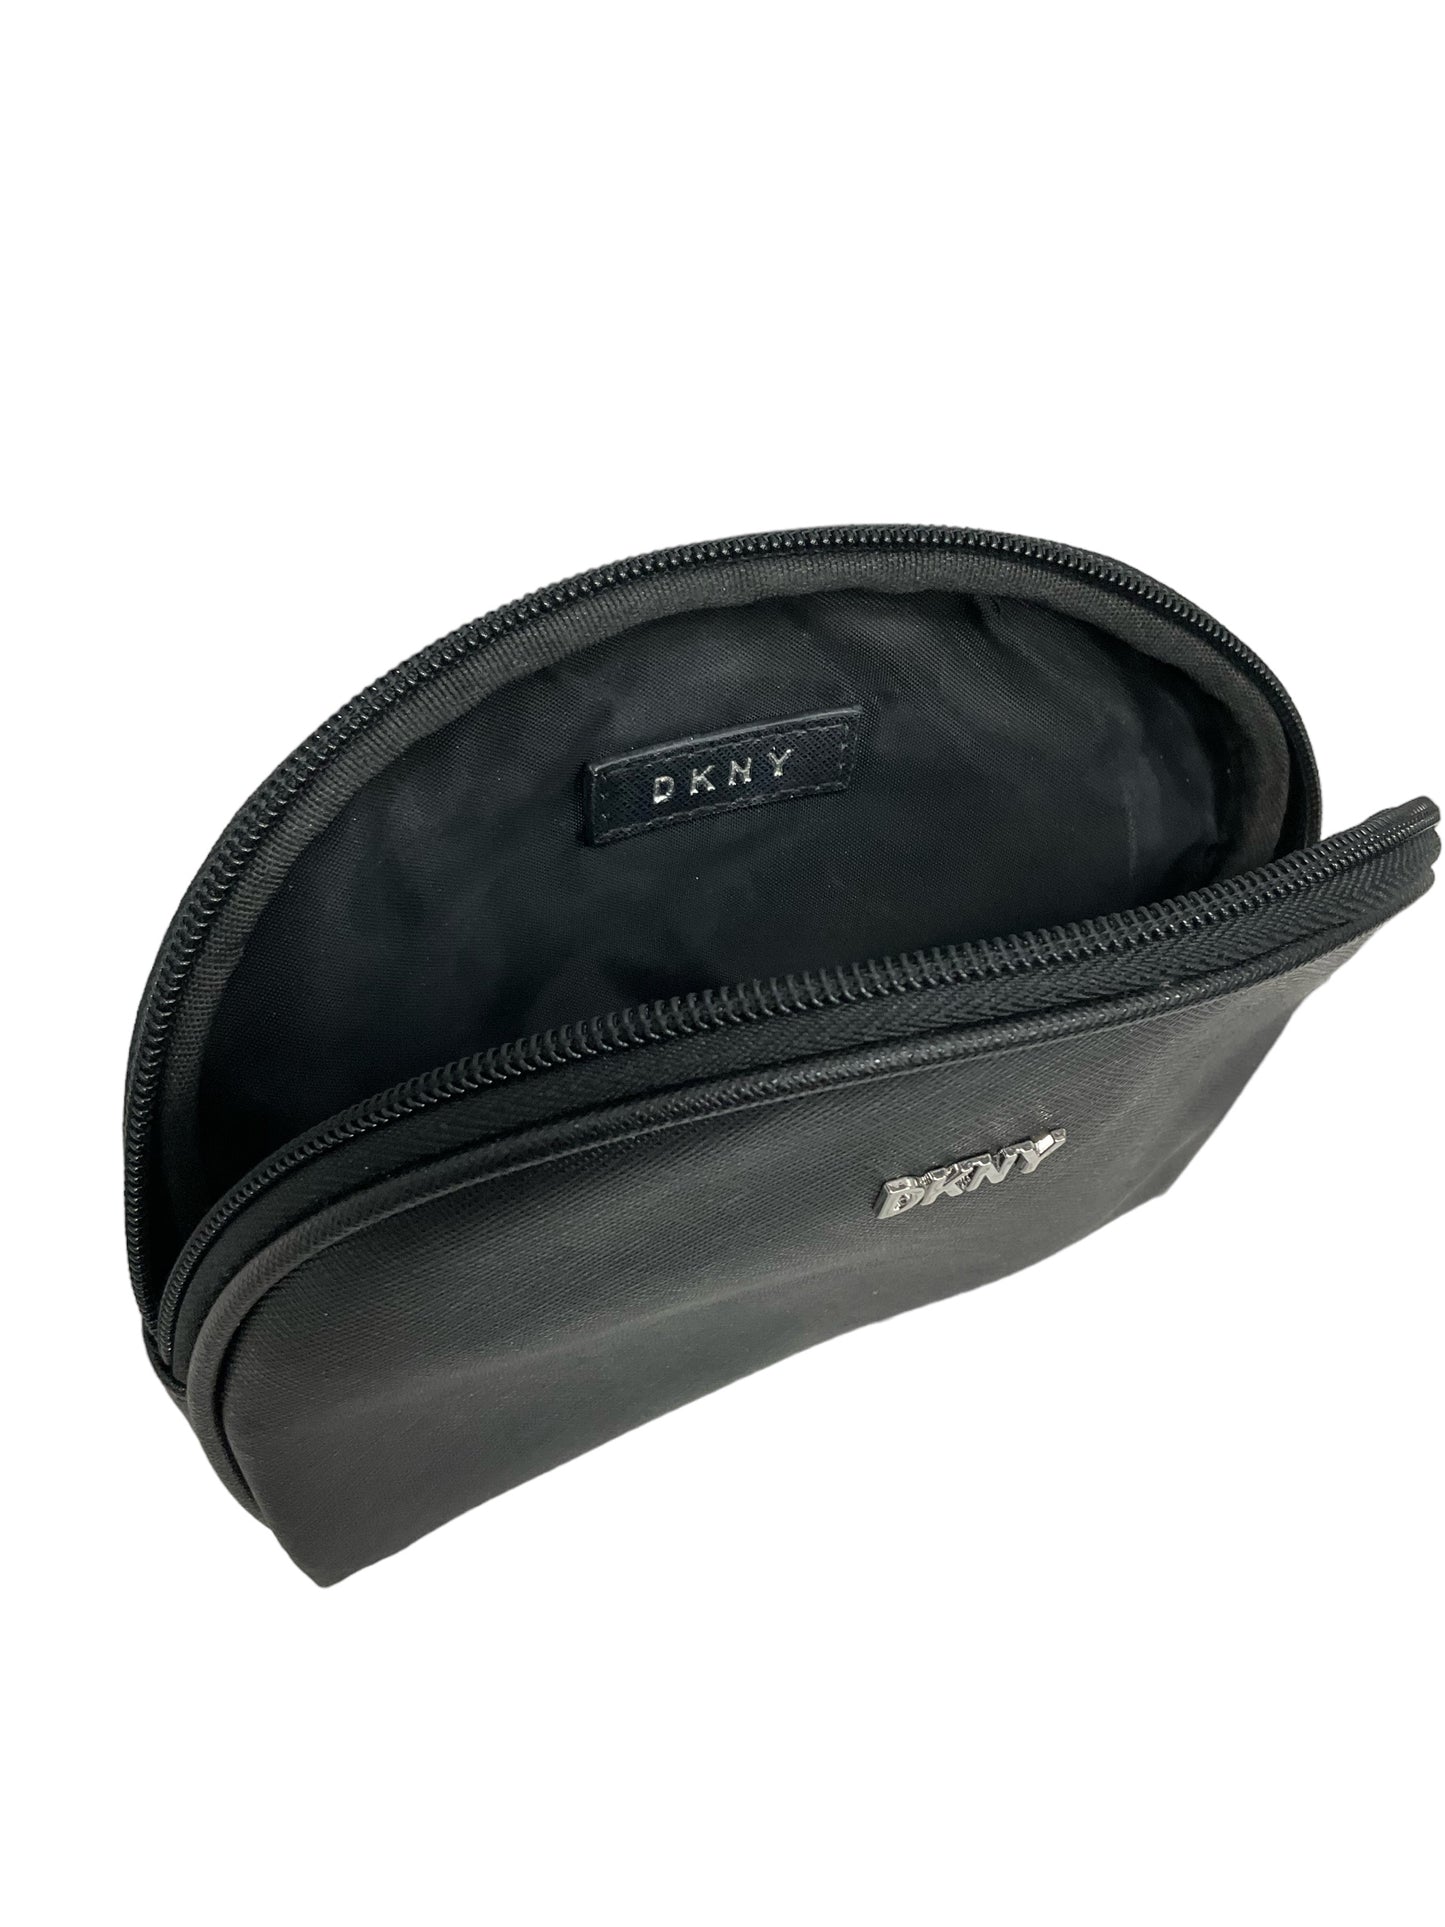 Makeup Bag By Dkny  Size: Small